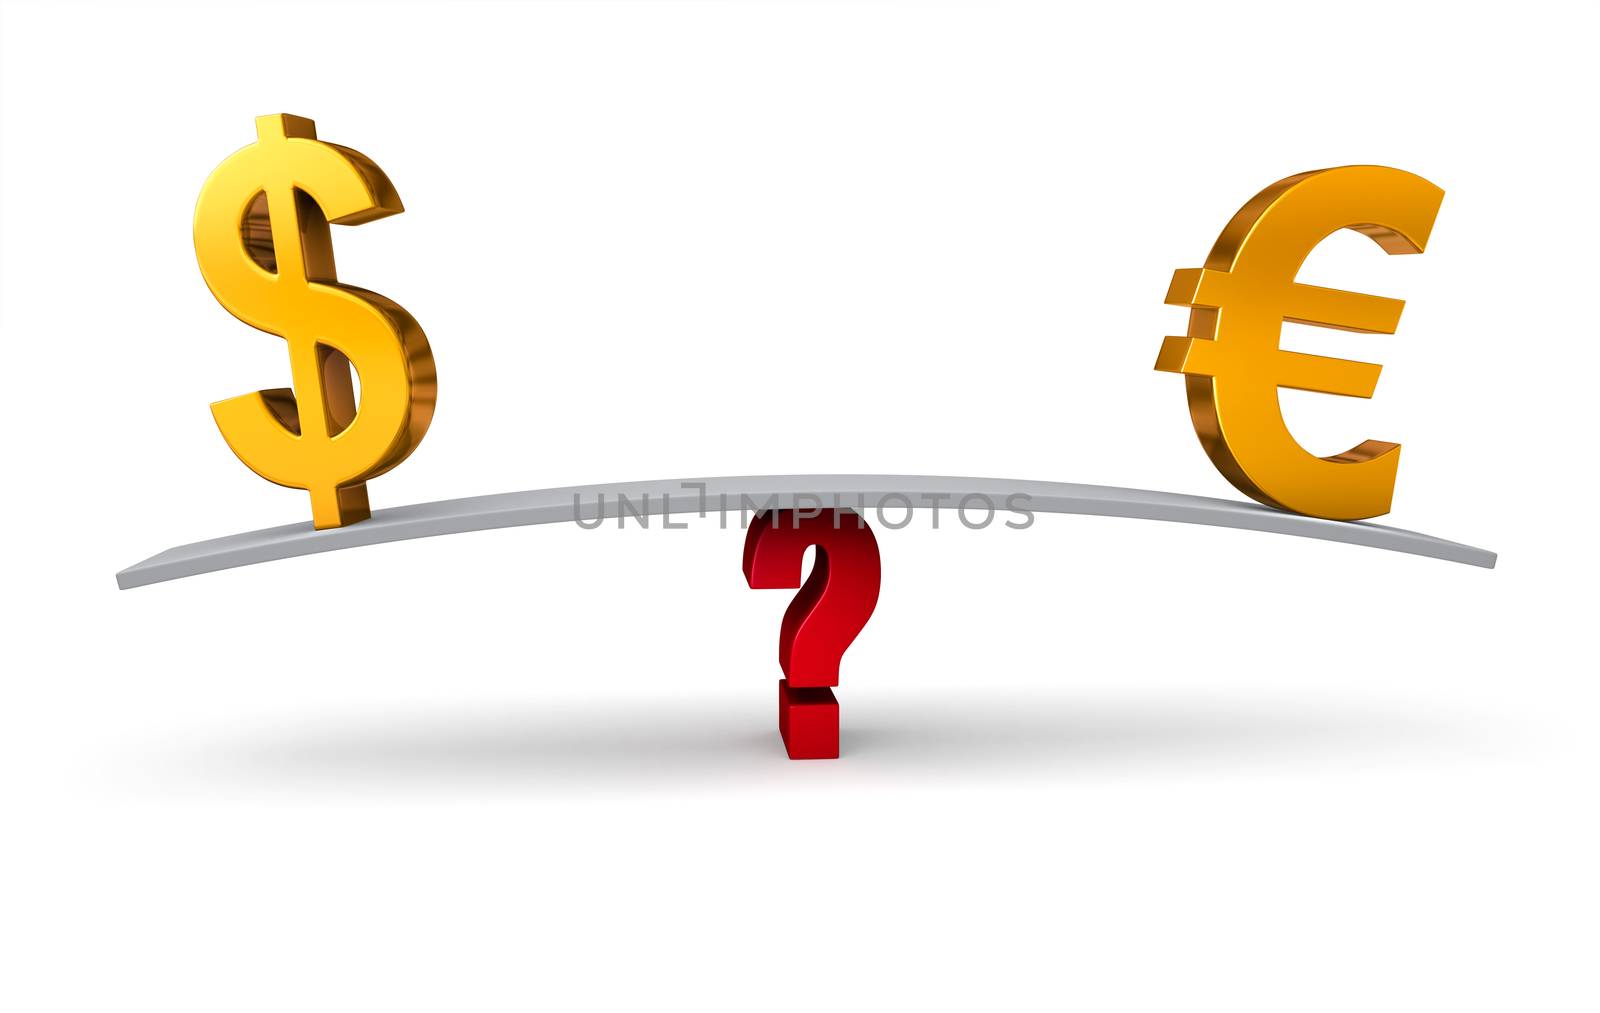 Choosing Between The Dollar or The Euro by Em3